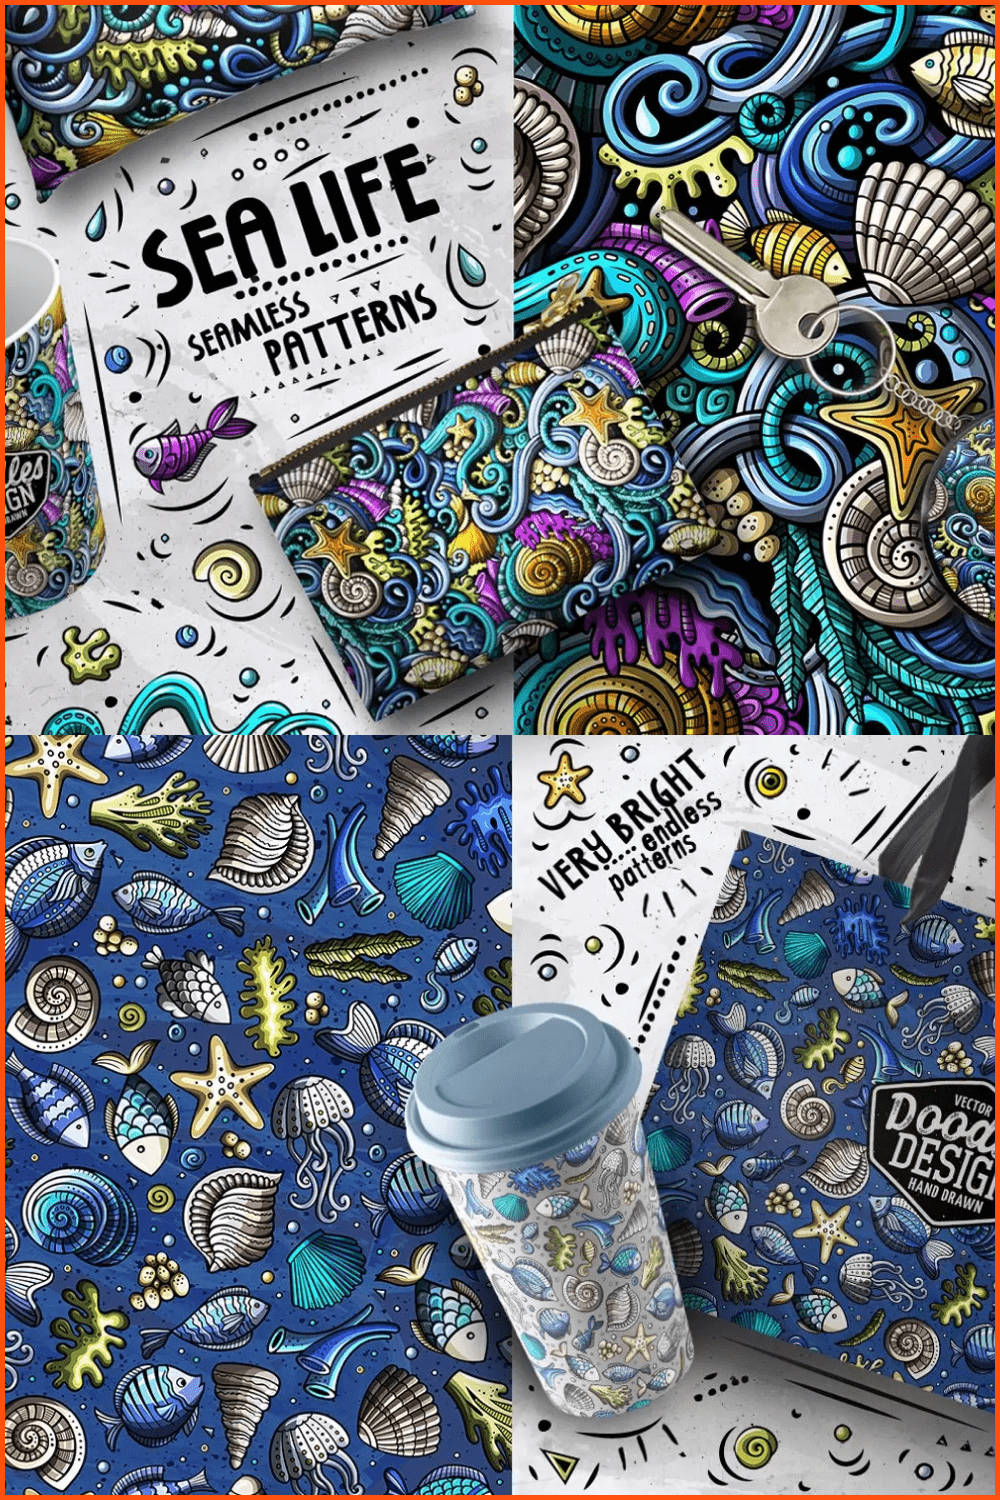 Colorful Sea Life Doodle Seamless Patterns.